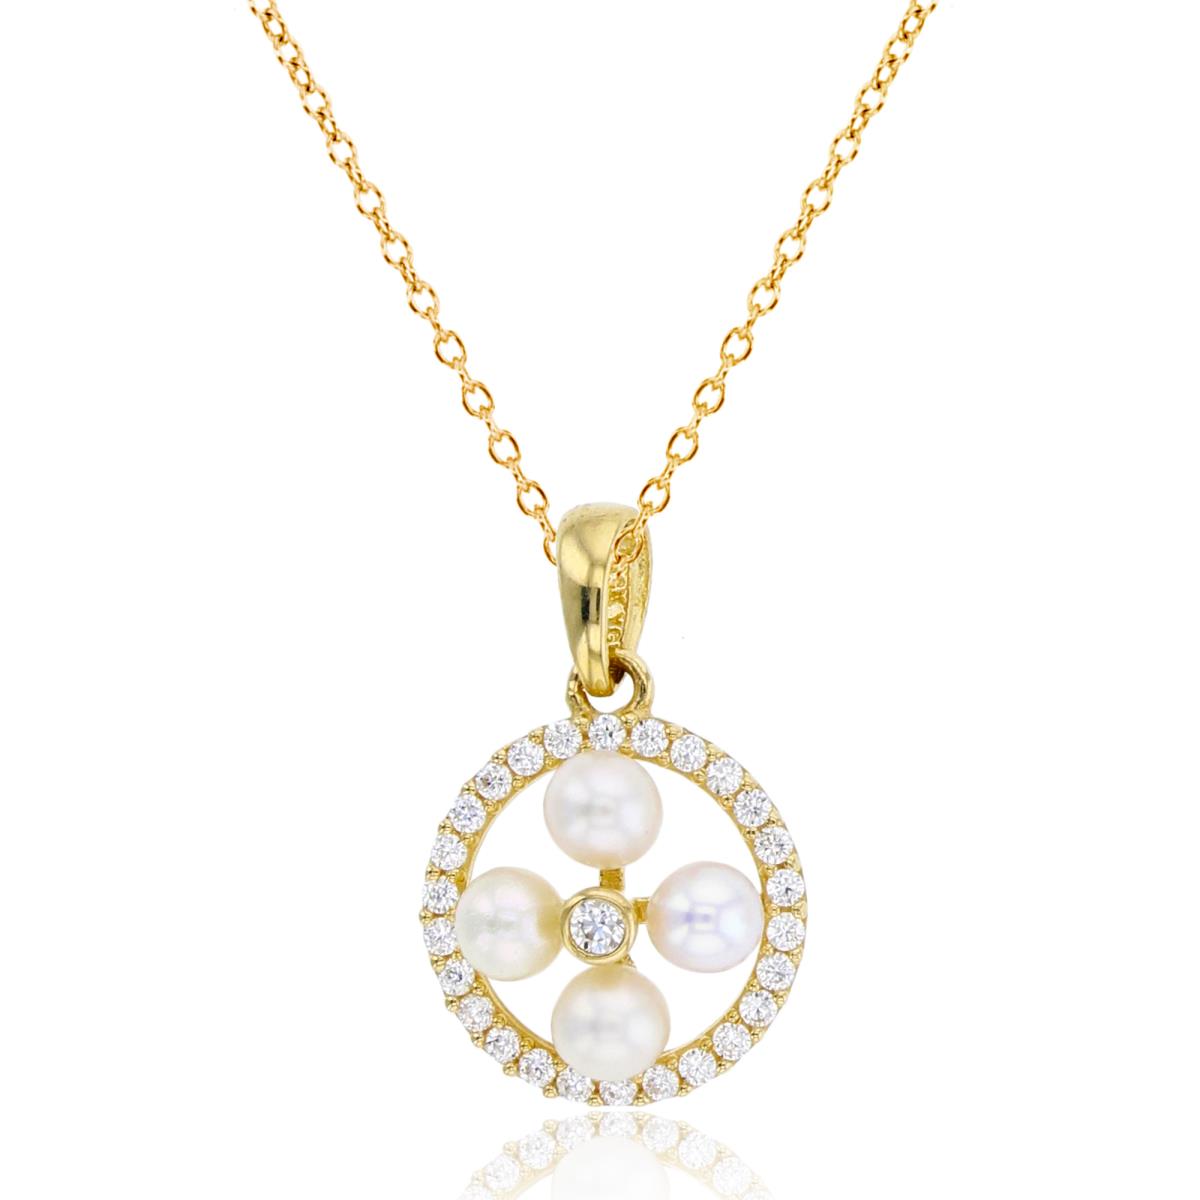 10K Yellow Gold 3mm Fresh Water Pearl & Rnd CZ Flower in Circle 18"Necklace